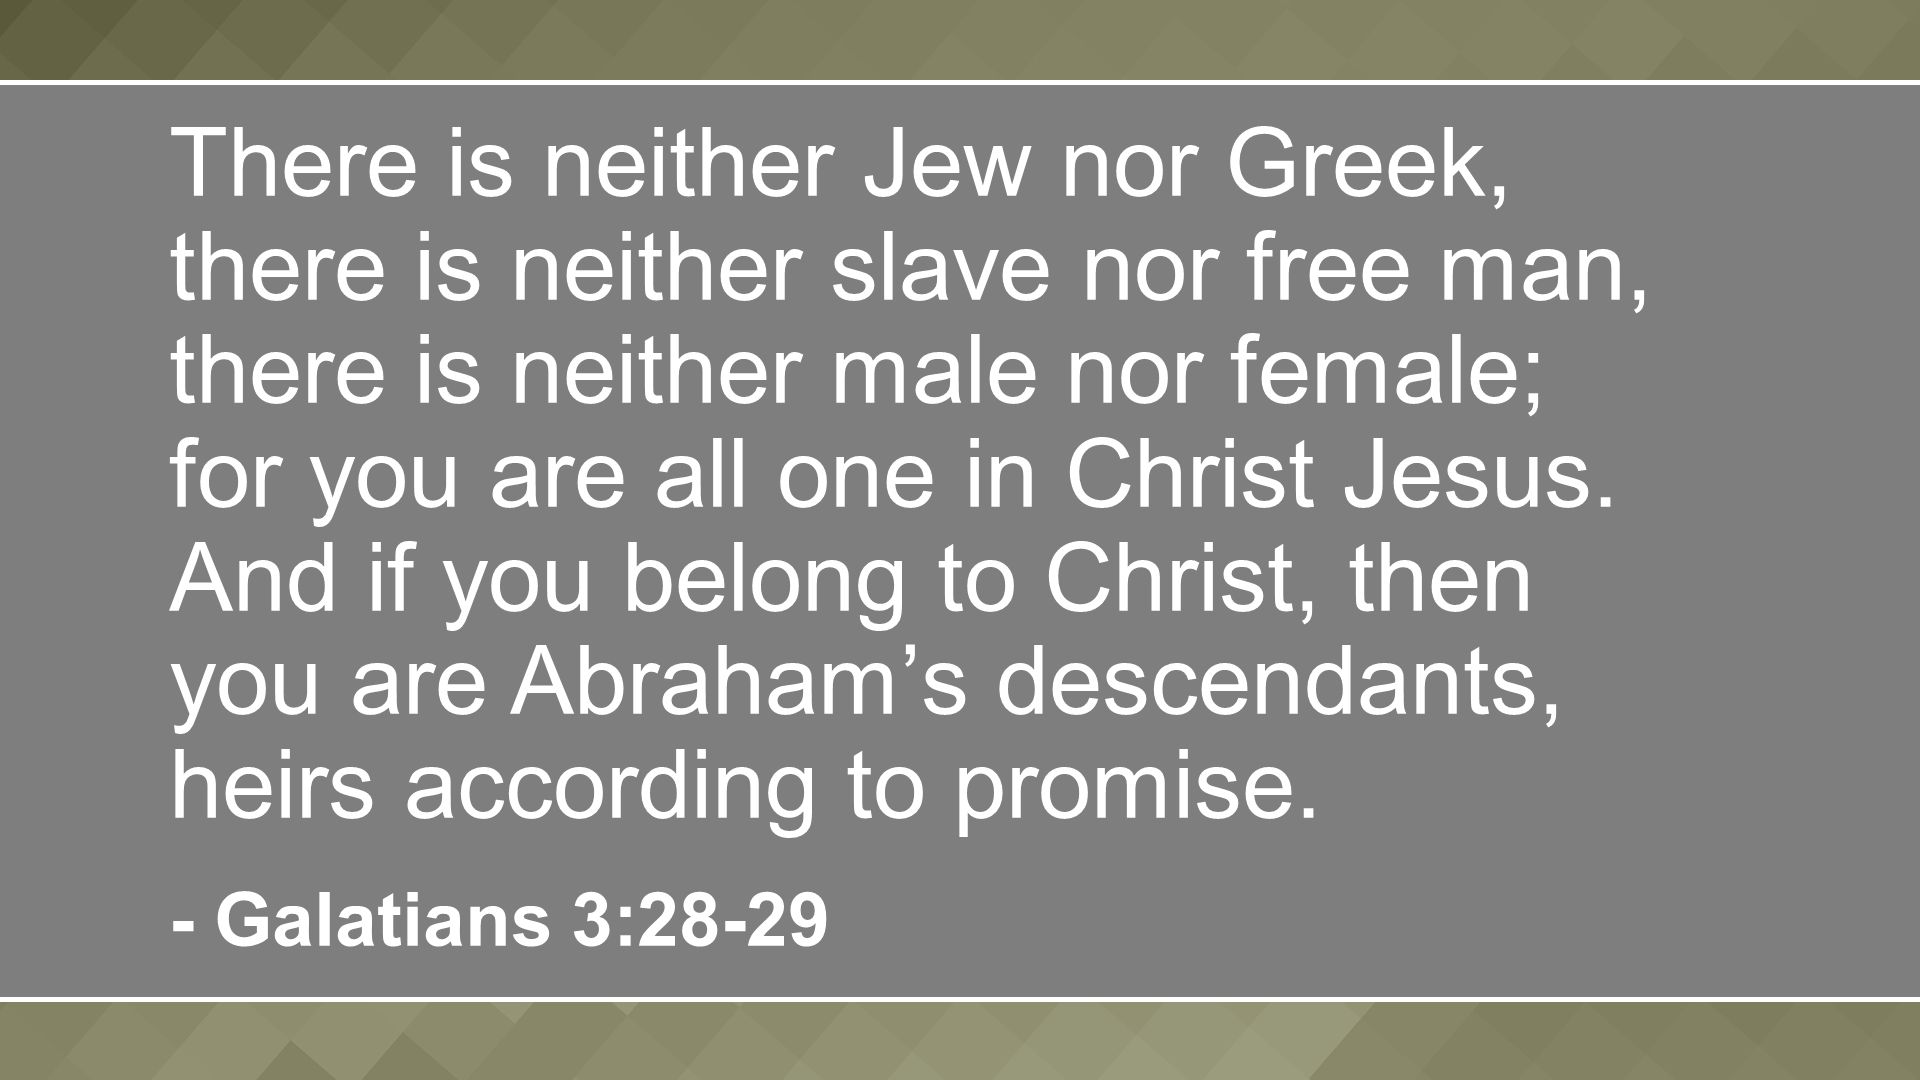 There is neither Jew nor Greek, there is neither slave nor free man, there is neither male nor female; for you are all one in Christ Jesus.